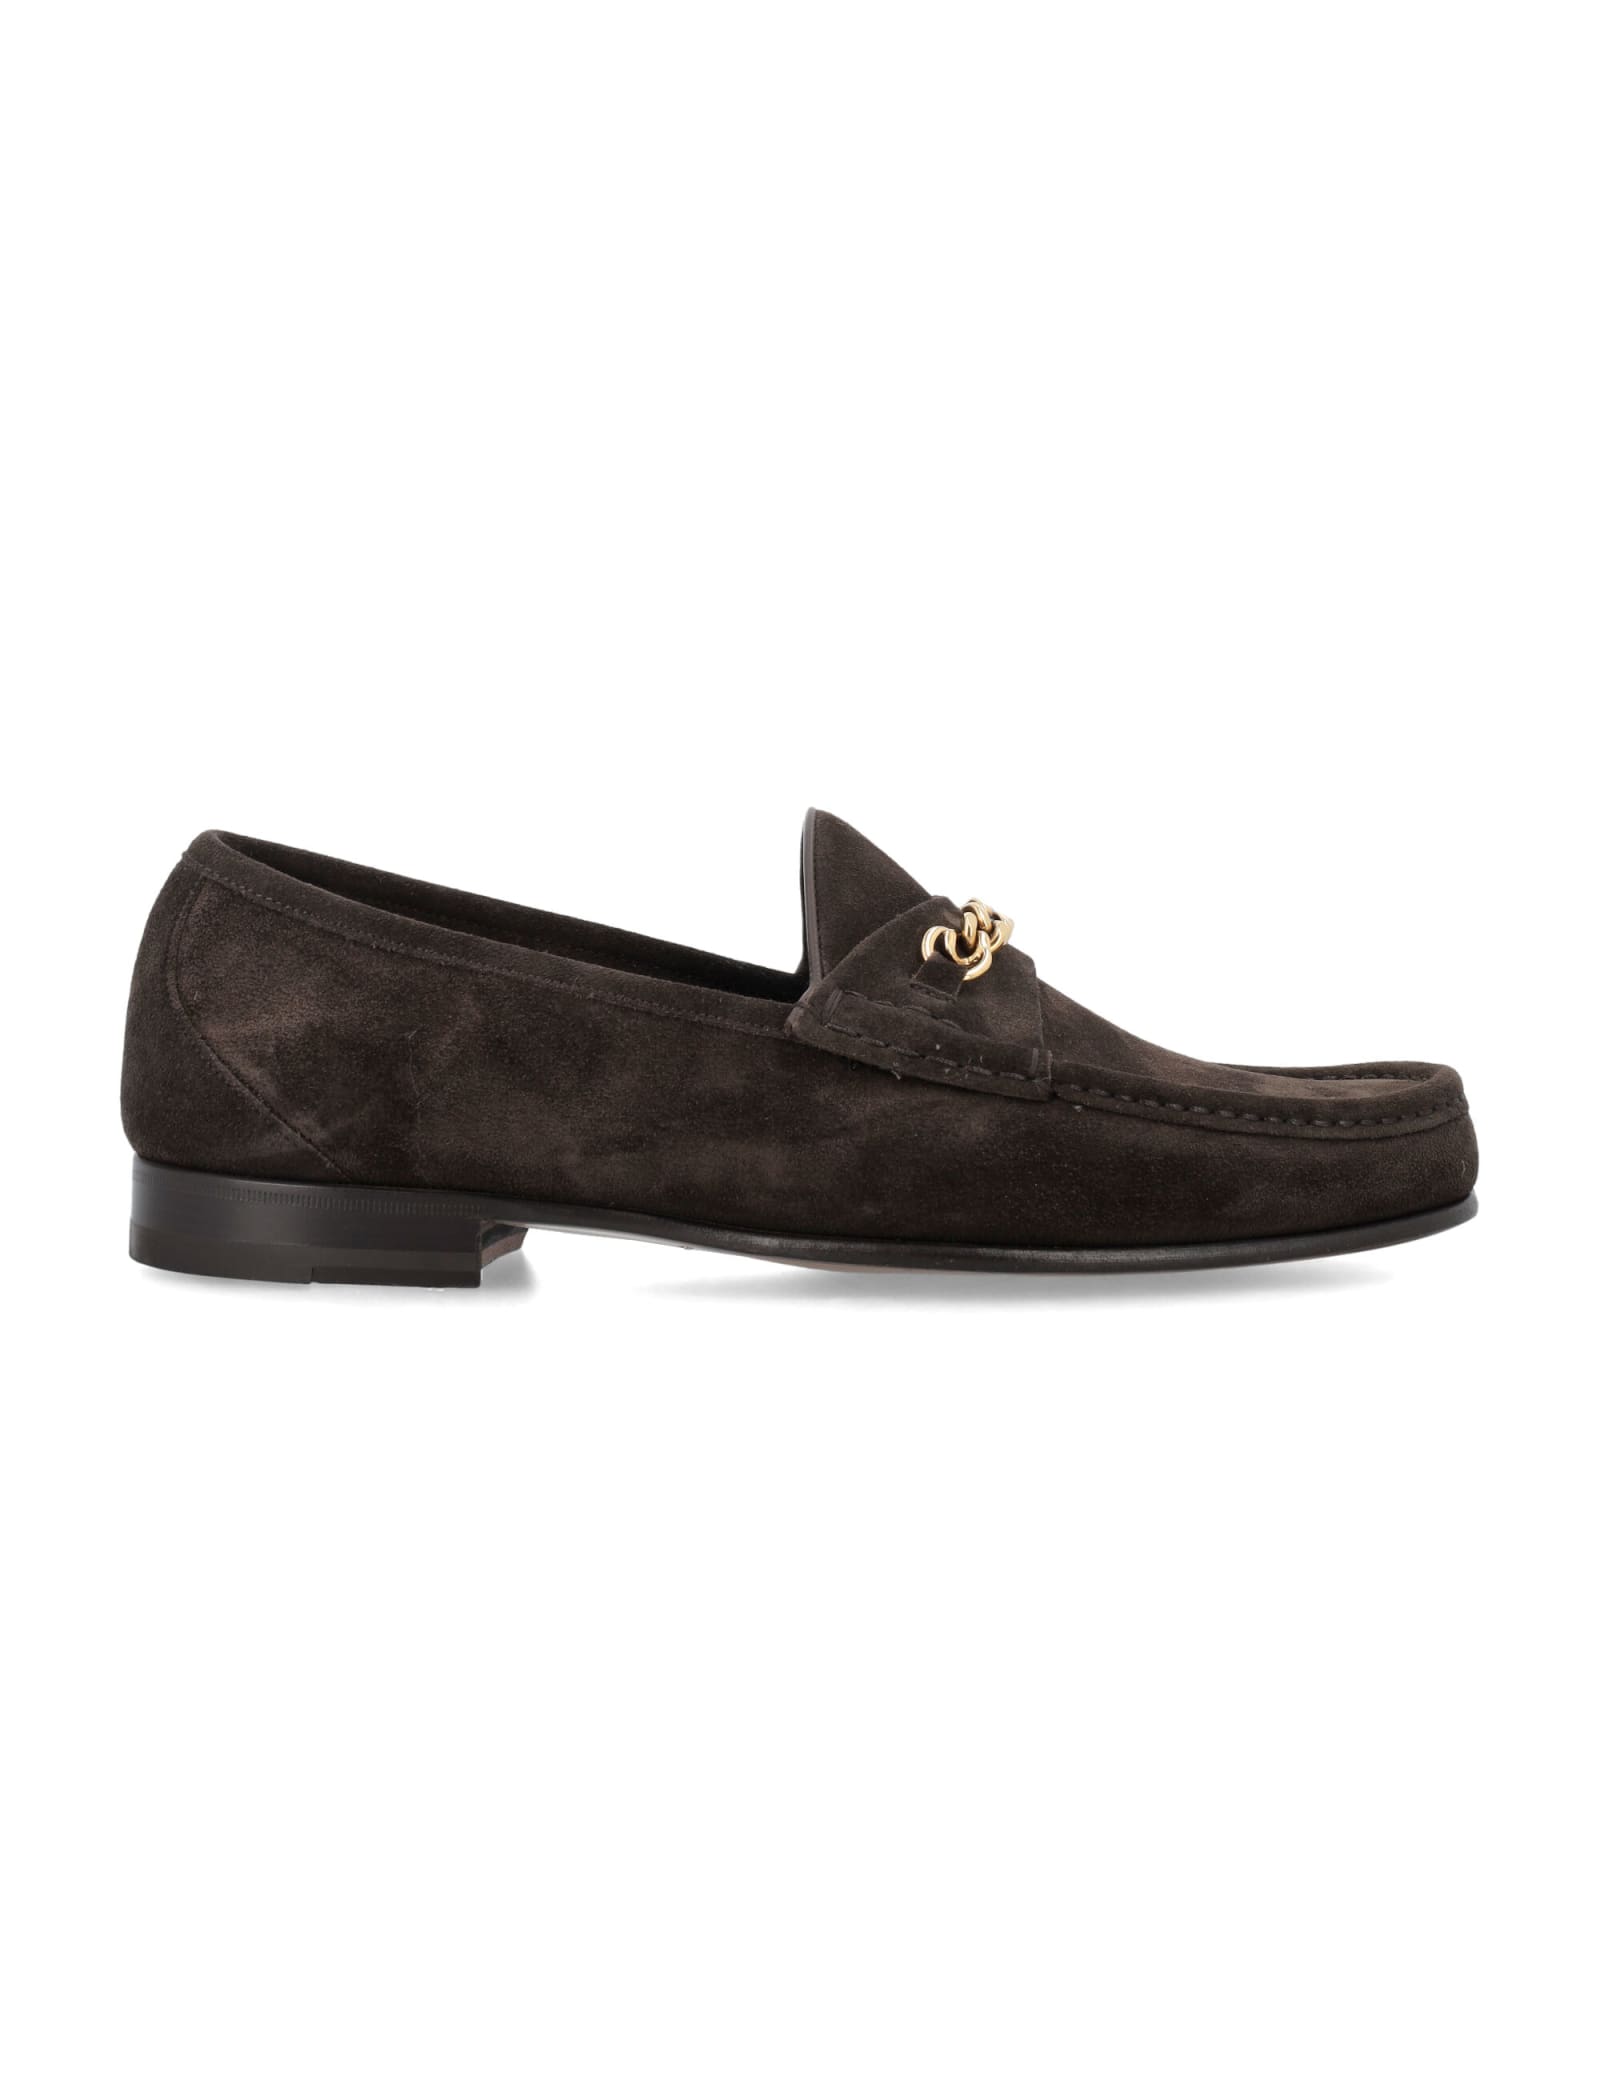 TOM FORD NEW YORK CHAIN LOAFER